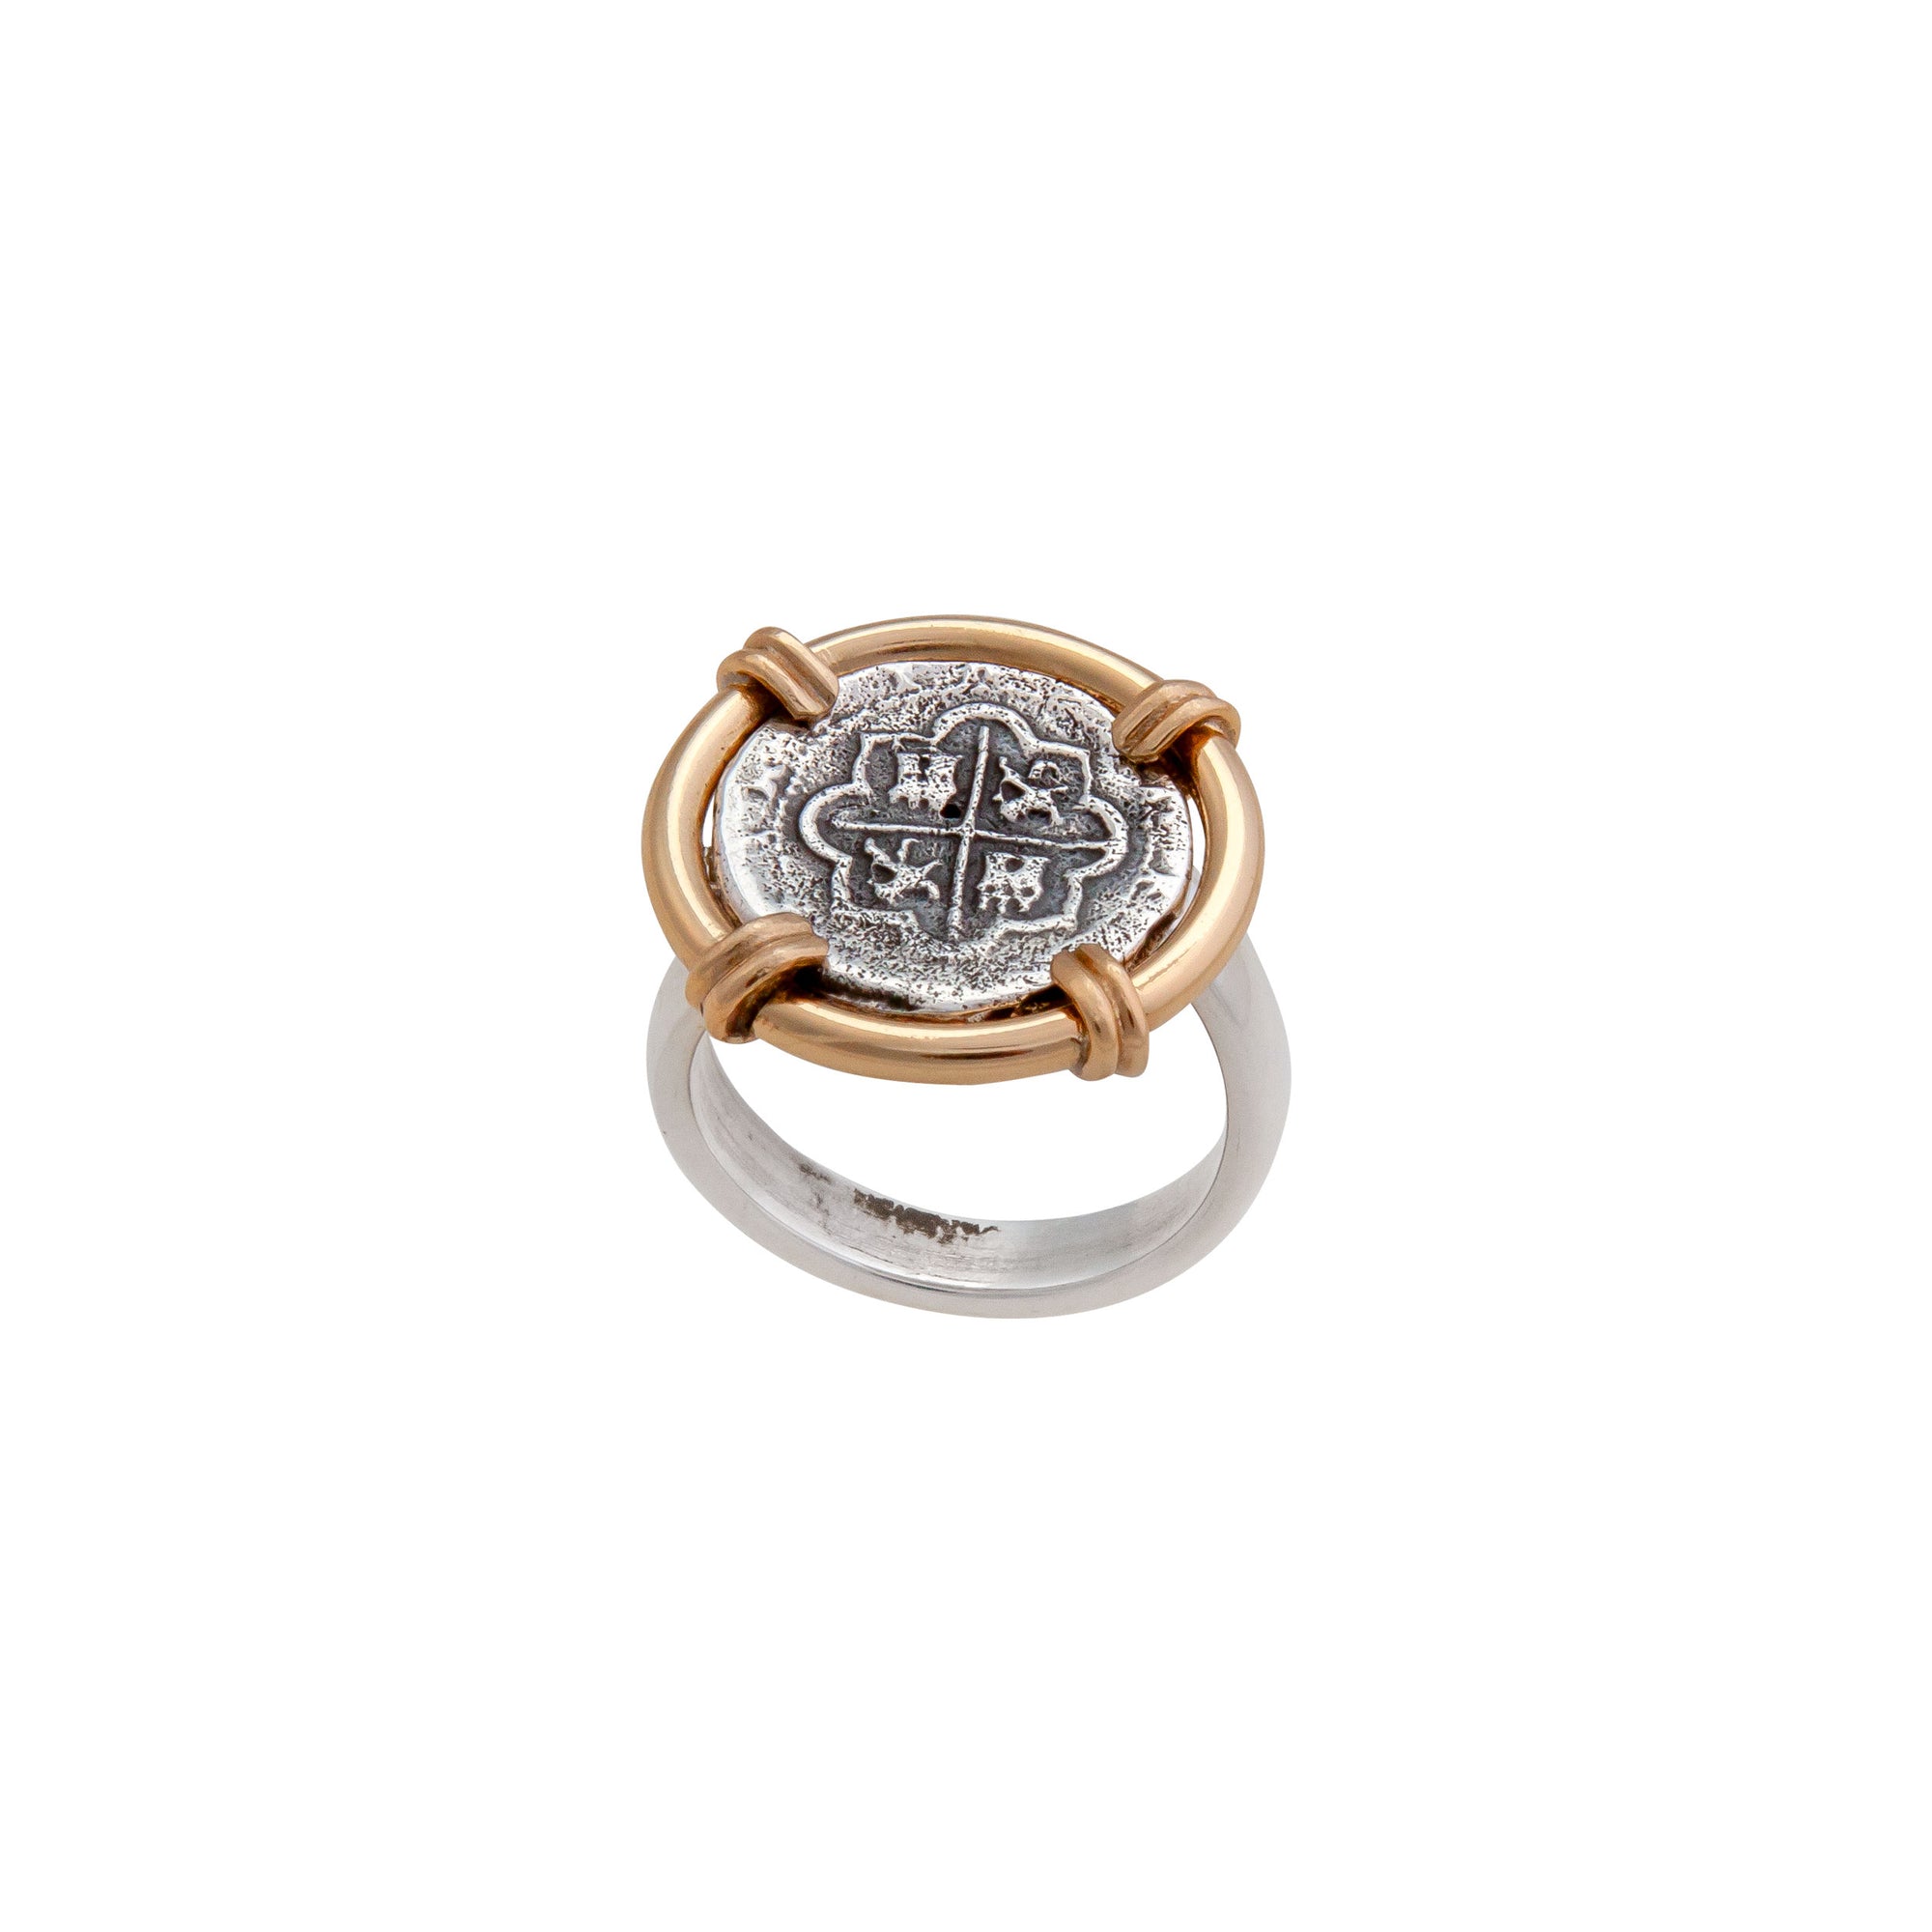 Sterling Silver and Alchemia Spanish Coin Prong Set Adjustable Ring | Charles Albert Jewelry